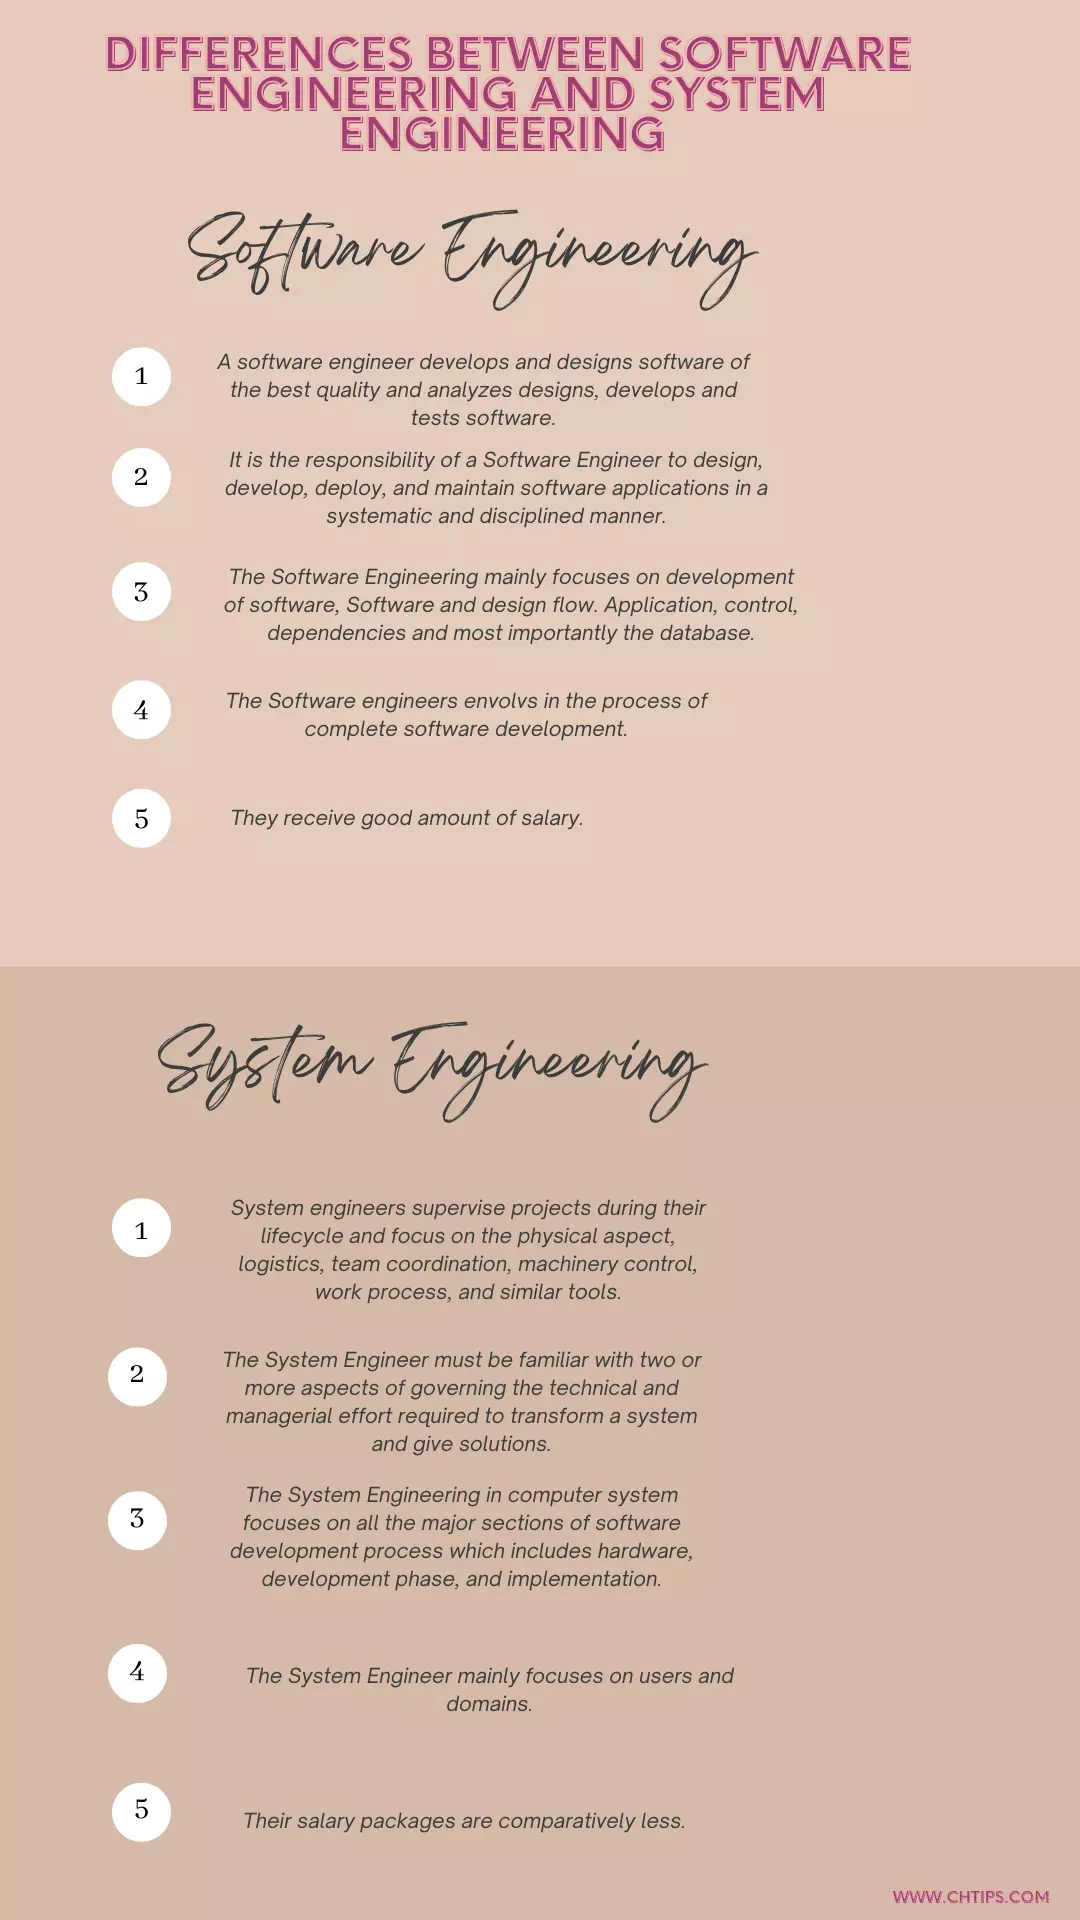 Differences Between Software Engineering and System Engineering